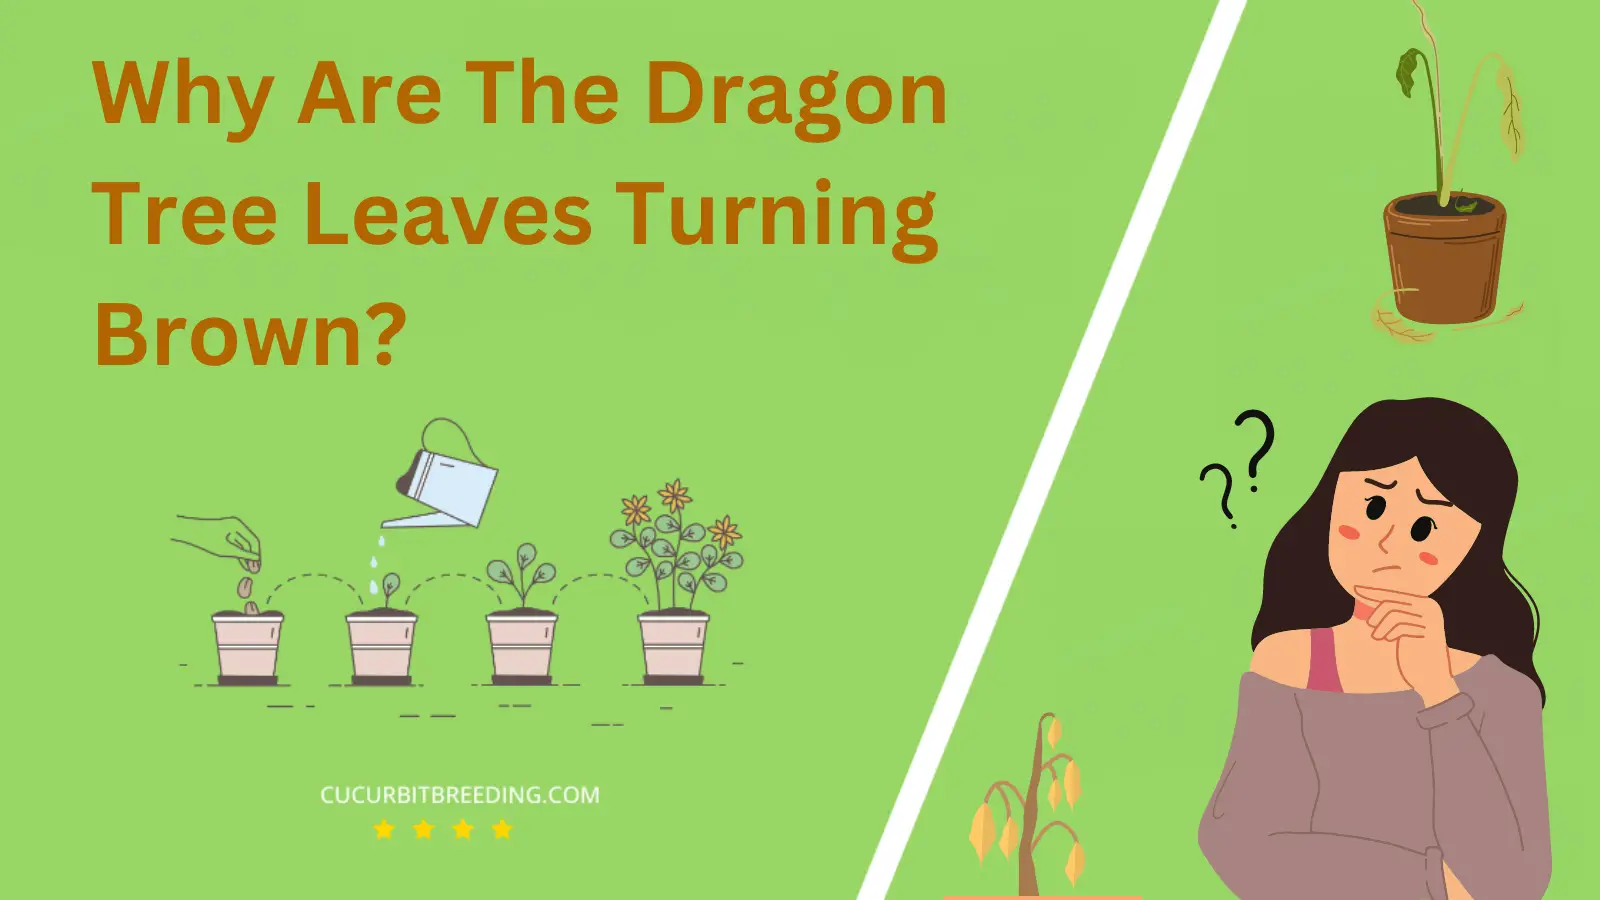 Why Are The Dragon Tree Leaves Turning Brown